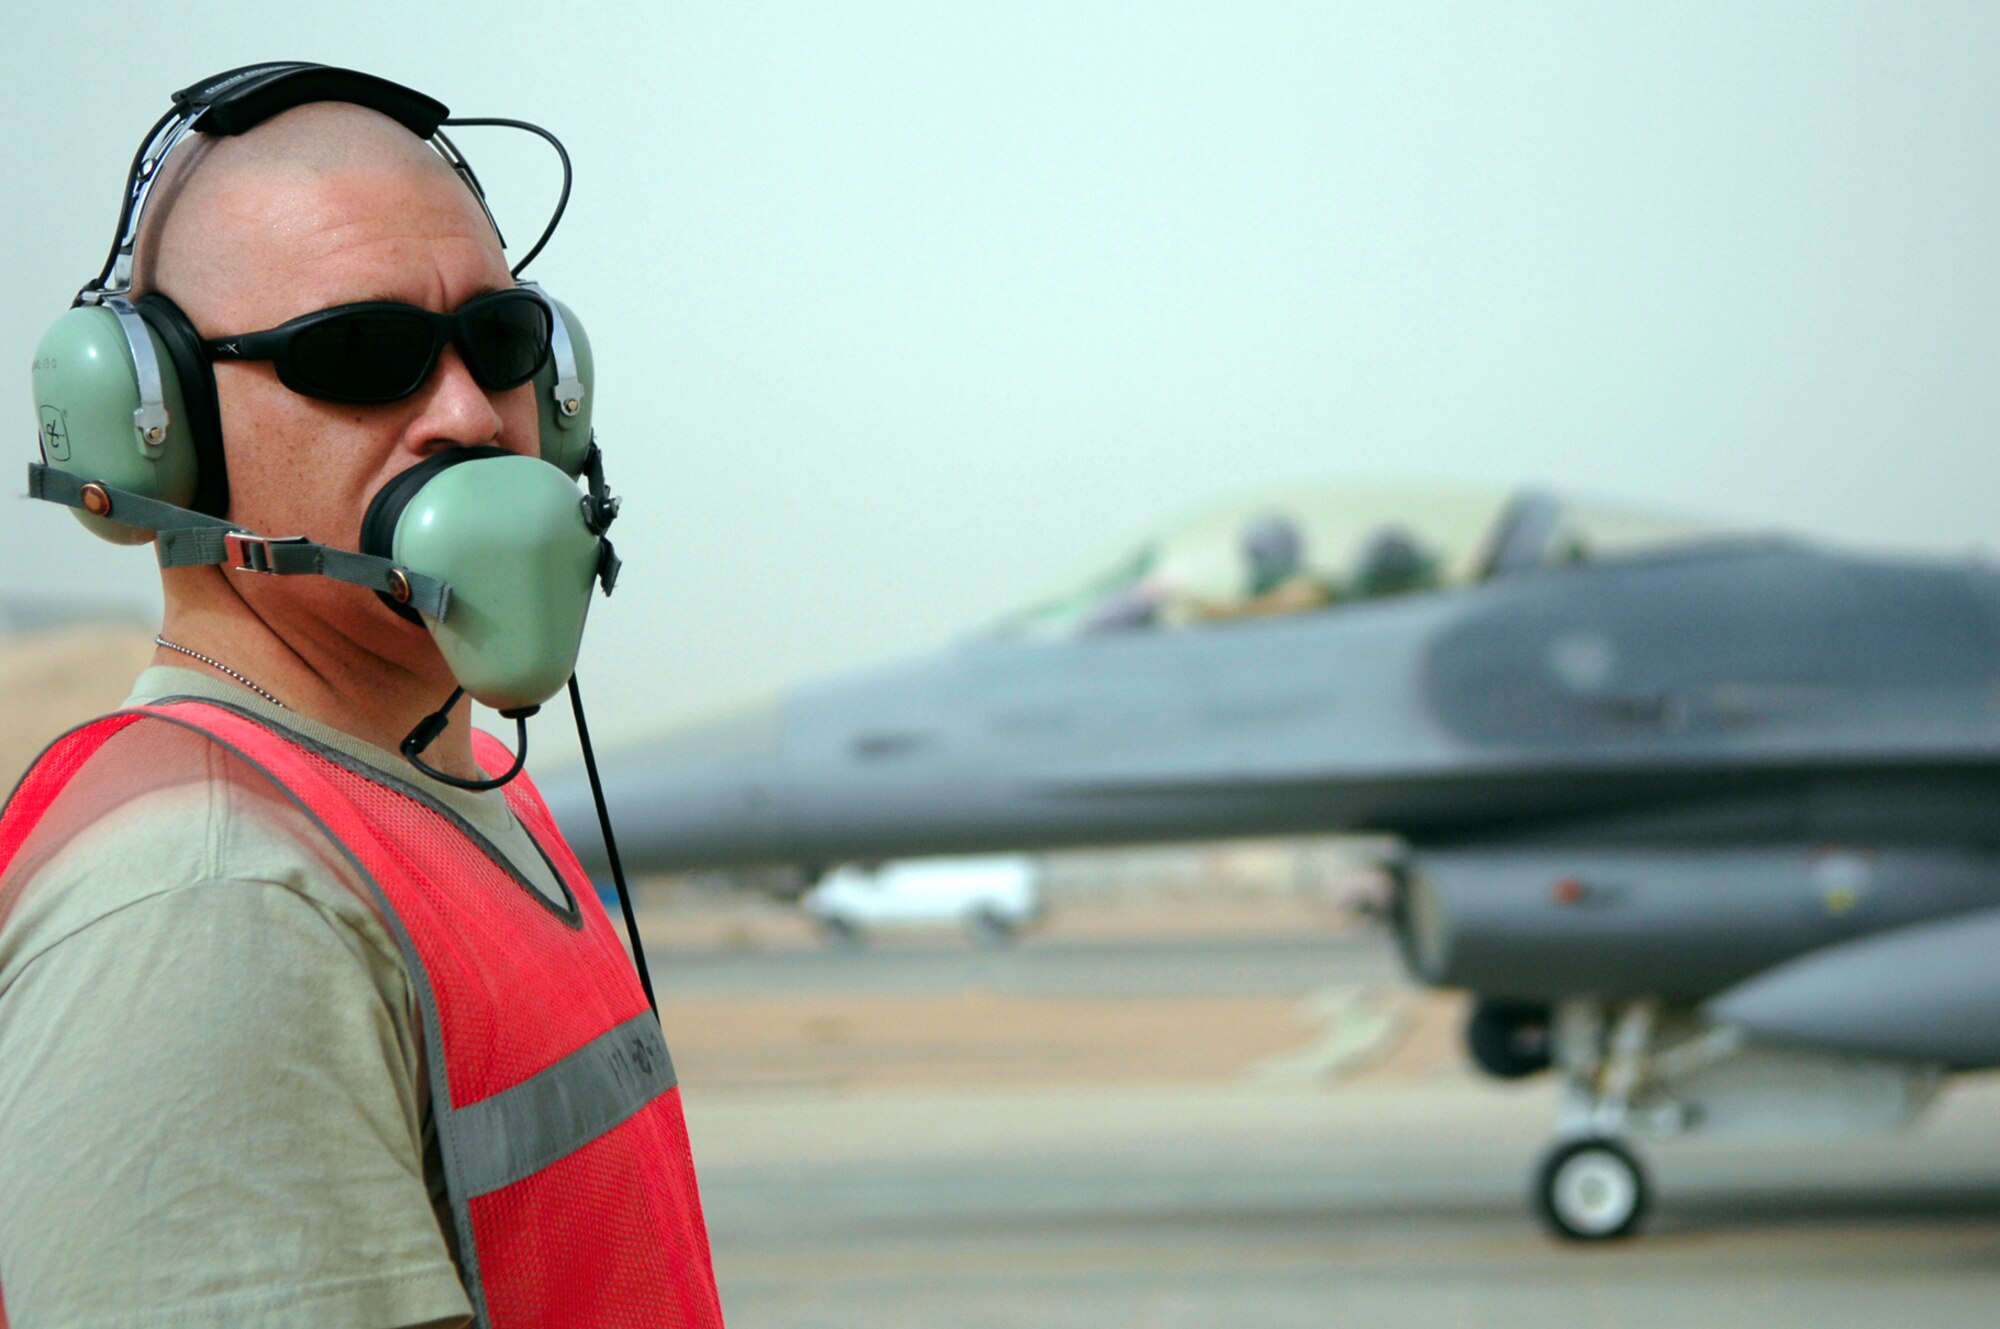 JOINT BASE BALAD, Iraq -- Tech Sgt. Jason Owens talks to fighter pilots during arming of an F-16 Fighting Falcon here July 8. When the Syracuse, N.Y., Air National Guard unit returns from its current deployment to Joint Base Balad, it will become the first Air National Guard unit in the country to adopt an MQ-9 Reaper unmanned aerial system mission. Sergeant Owens, a weapons specialist with the 332nd Expeditionary Fighter Squadron, is deployed from Hancock Field Air National Guard Base in Syracuse, N.Y. (U.S. Air Force photo/Senior Airman Julianne Showalter)